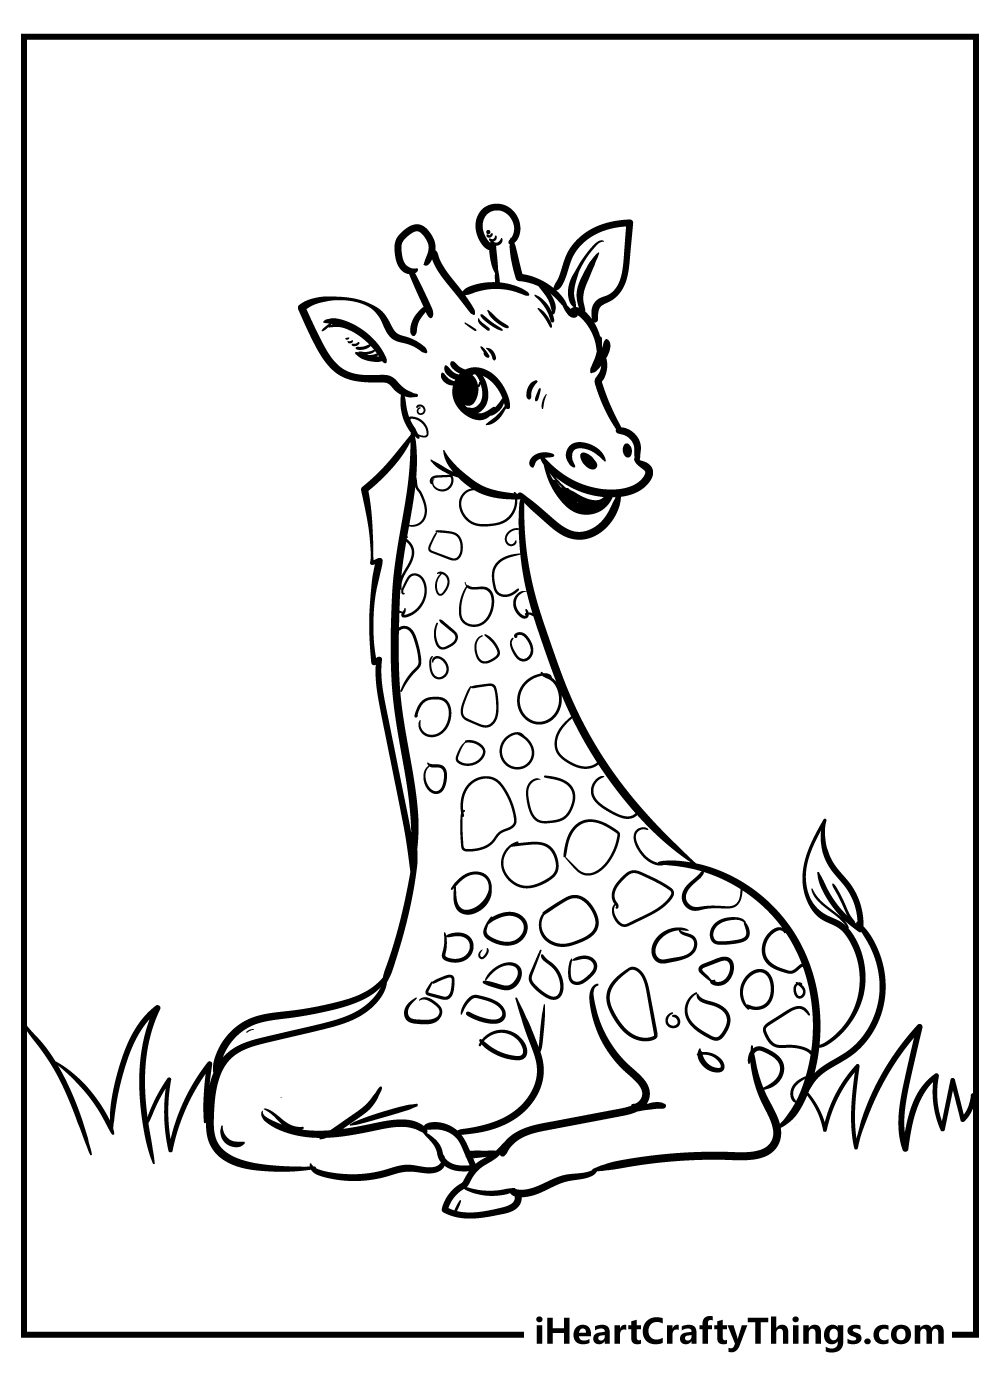 Giraffe coloring pages free printable